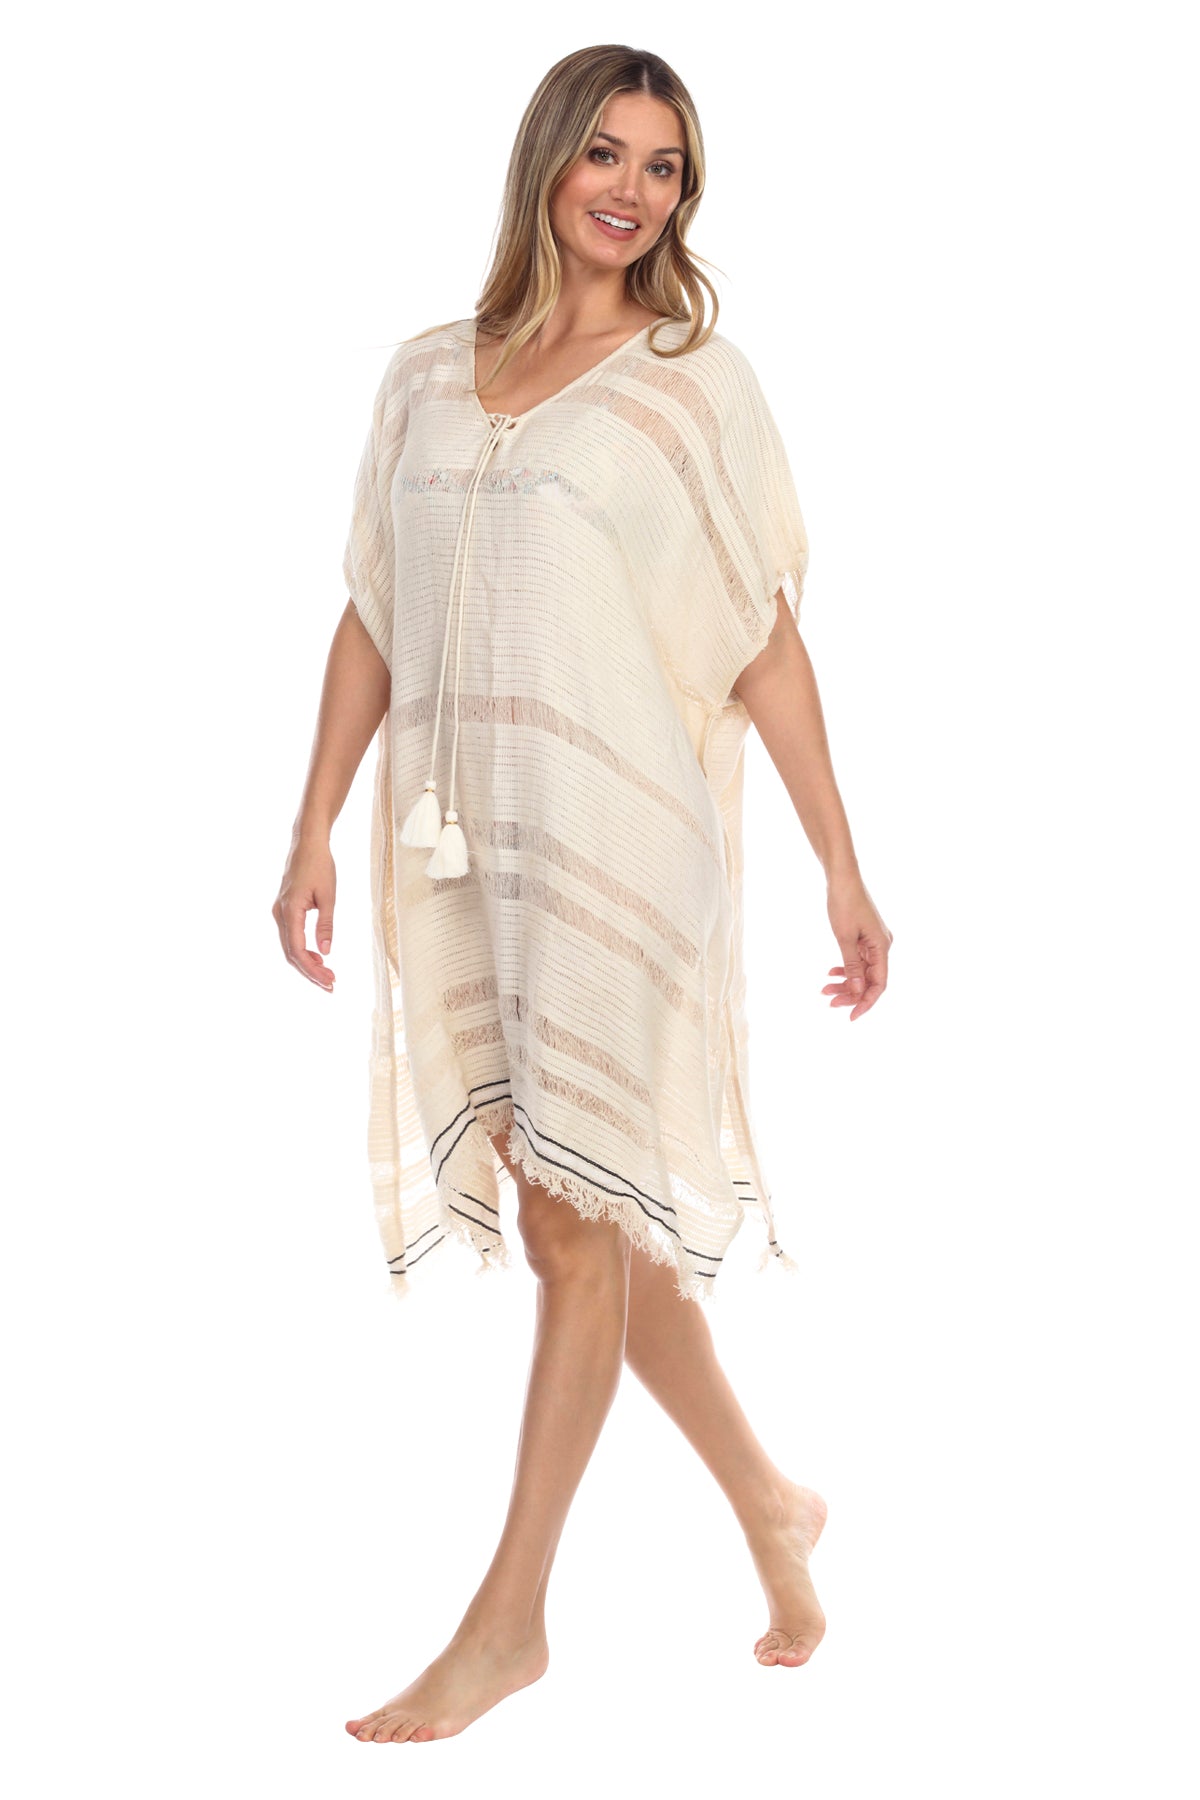 Annalyn Striped Lace Up Caftan Coverup